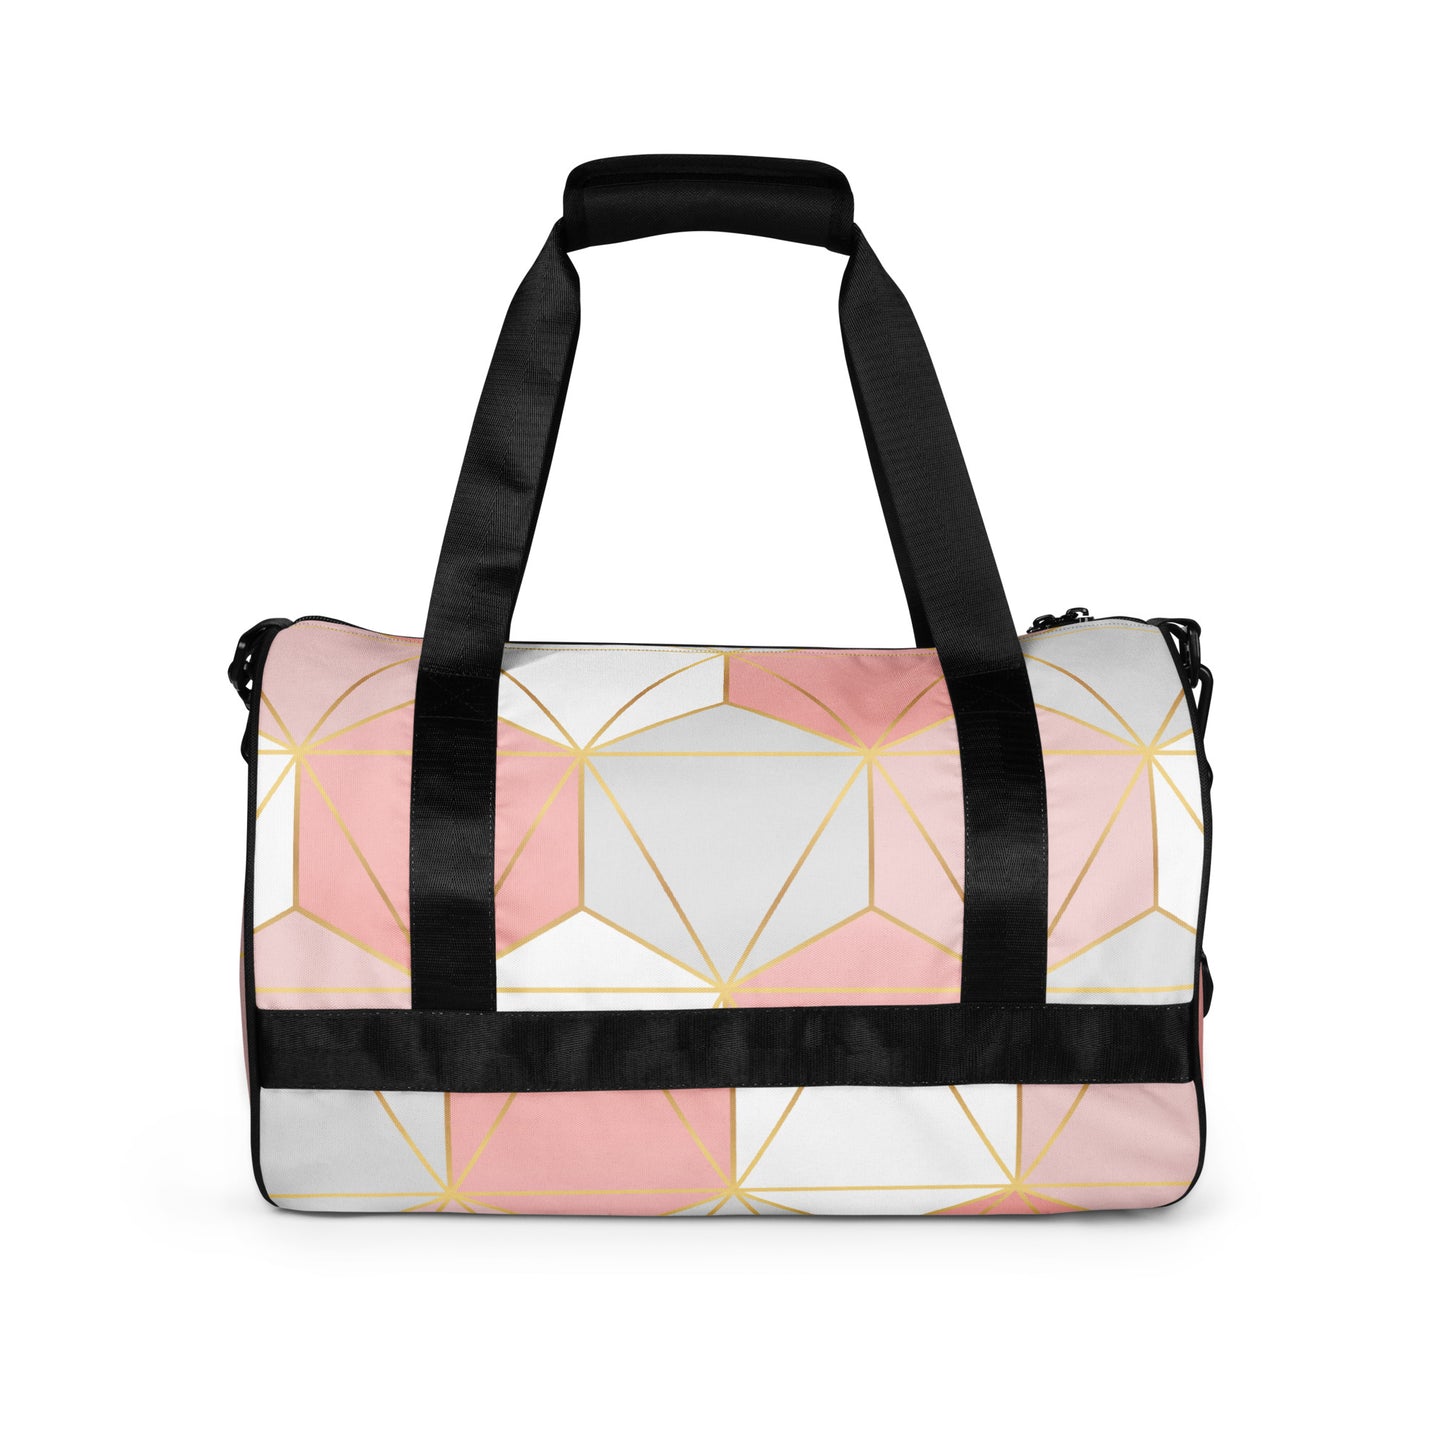 Hexagonal Lines - Sustainably Made Gym Bag